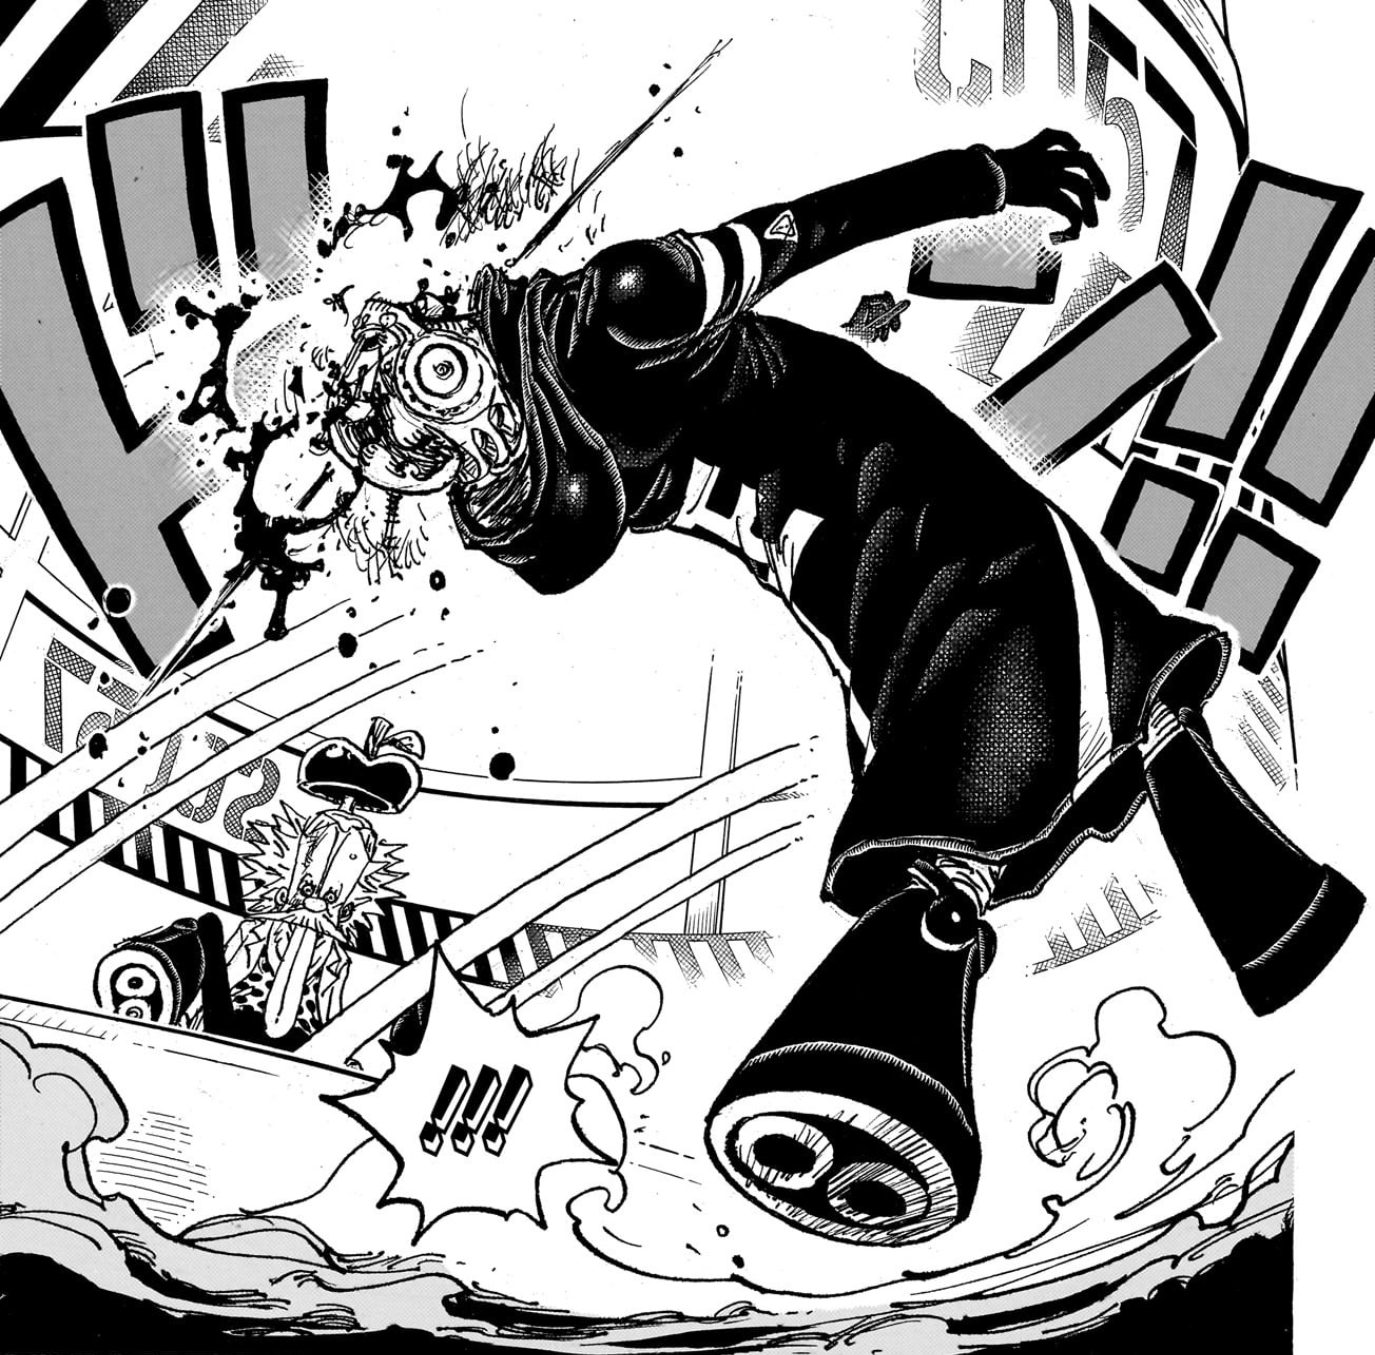 One Piece chapter 1070 has fans worried for Sanji